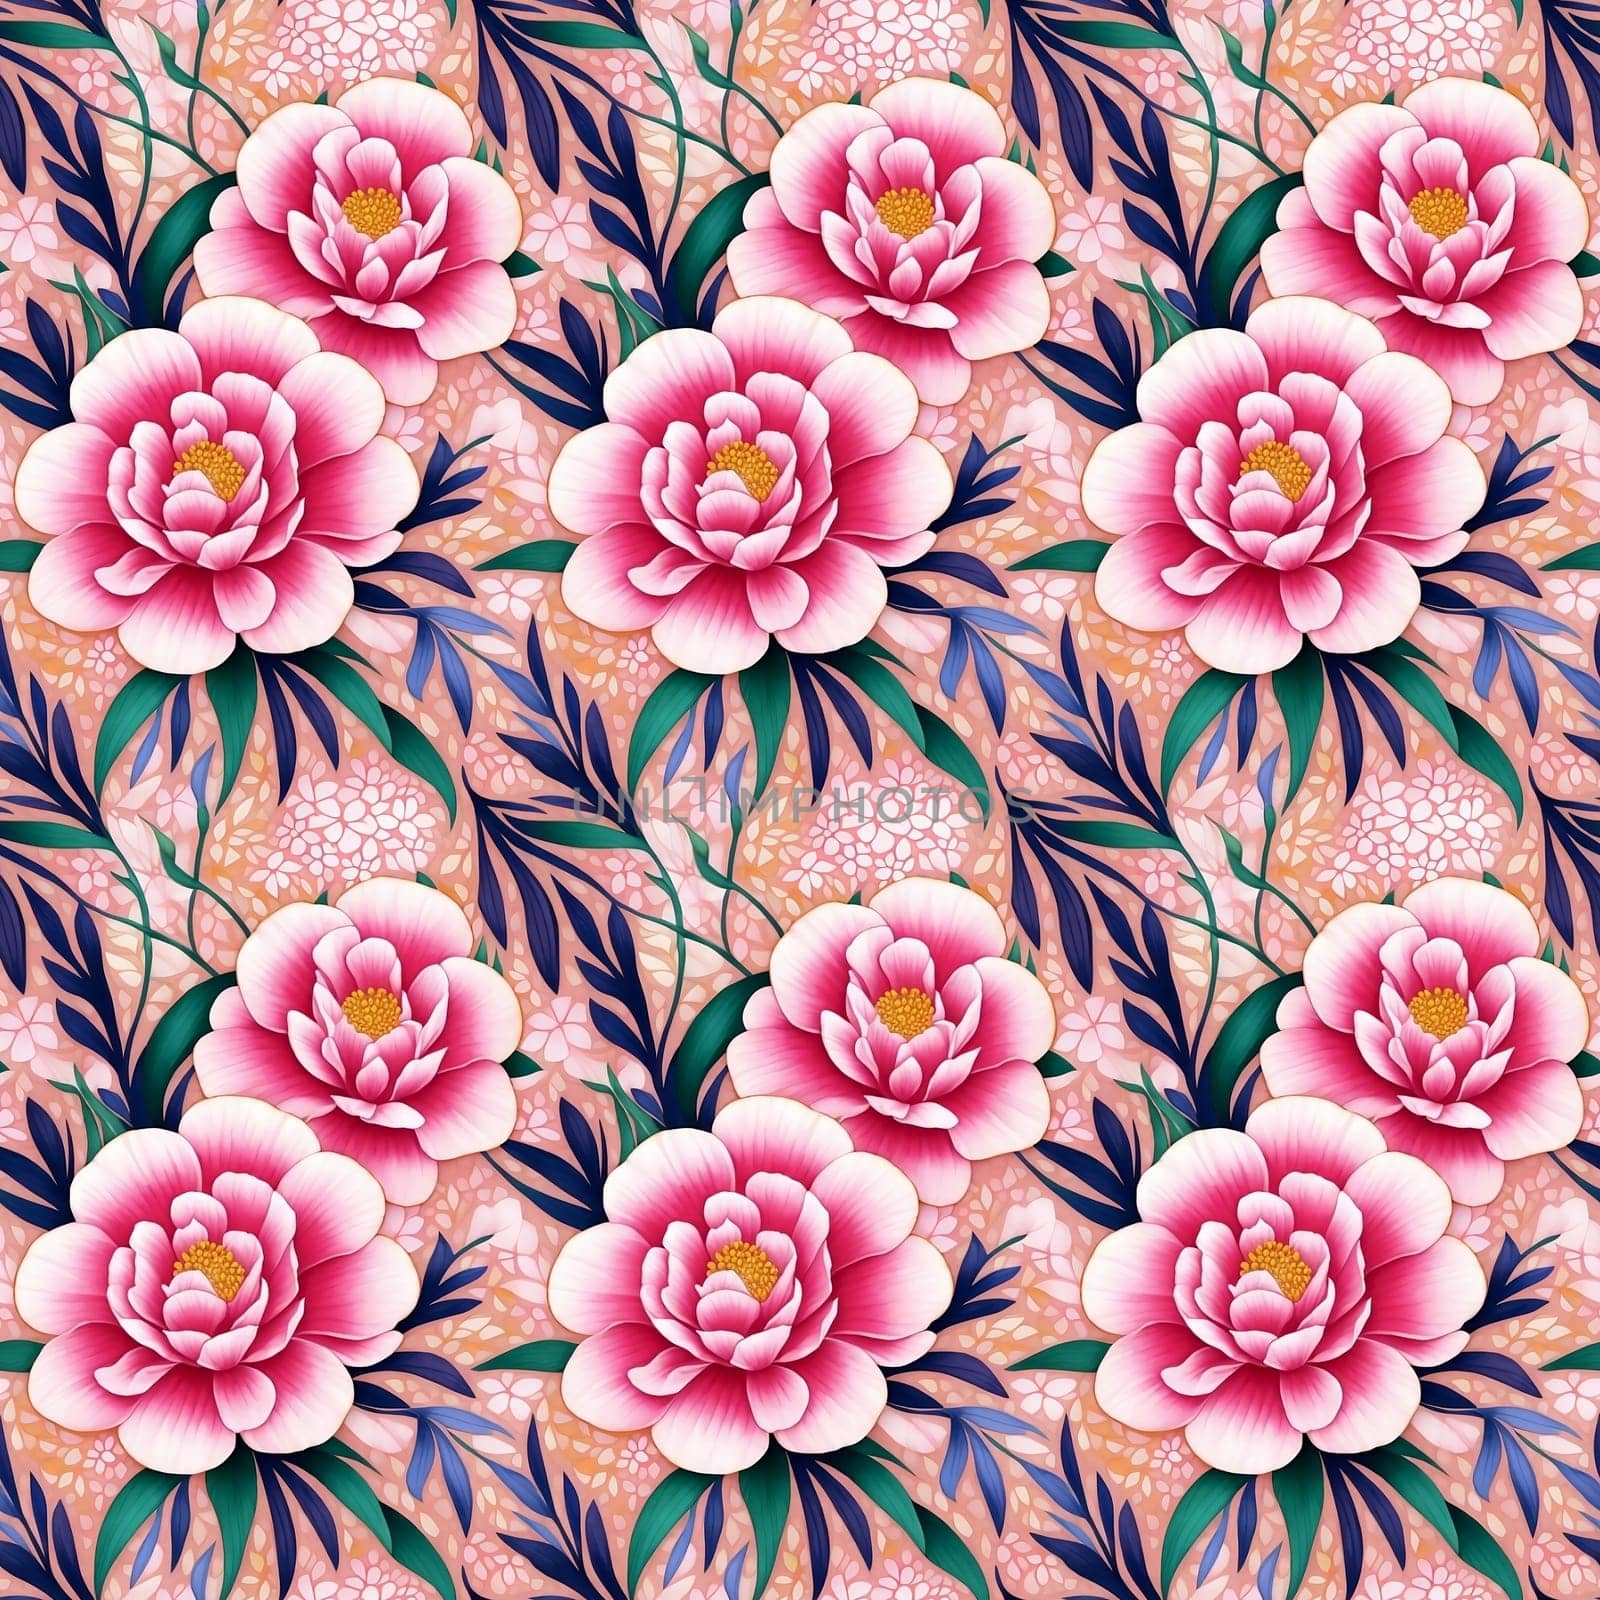 Floral Seamless Pattern of Stylized Pink White Peony Flowers on Pink Peach Backdrop by LanaLeta